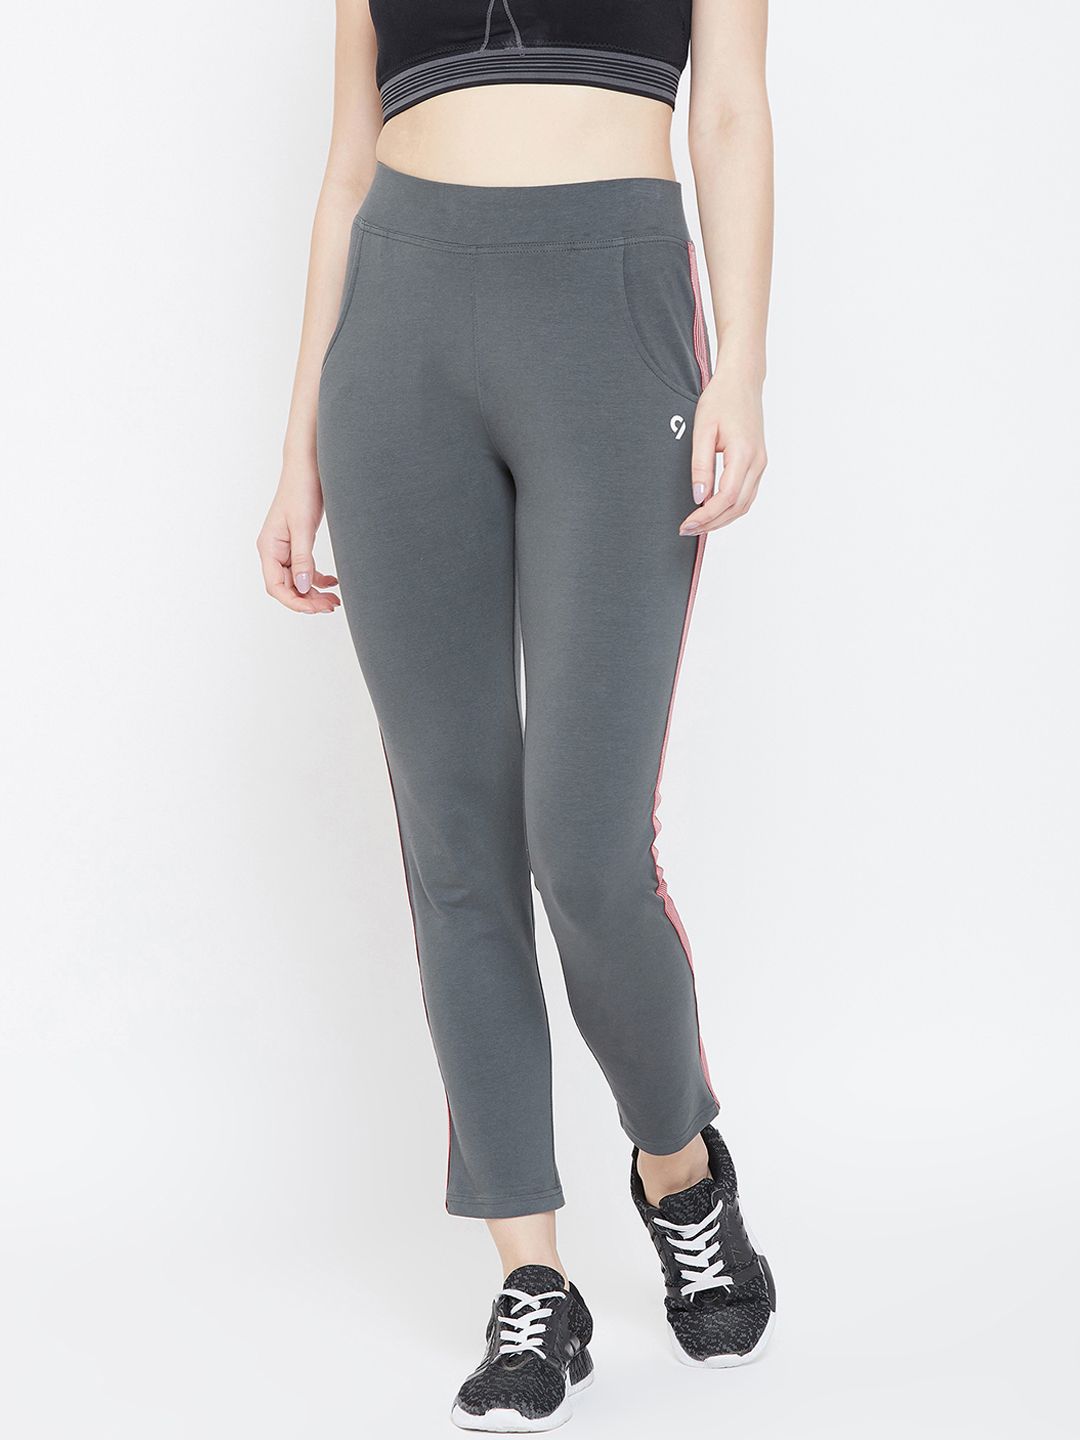 C9 AIRWEAR Women Grey Solid & Red Striped Taped Straight-Fit Slip On Airwear Track Pants Price in India